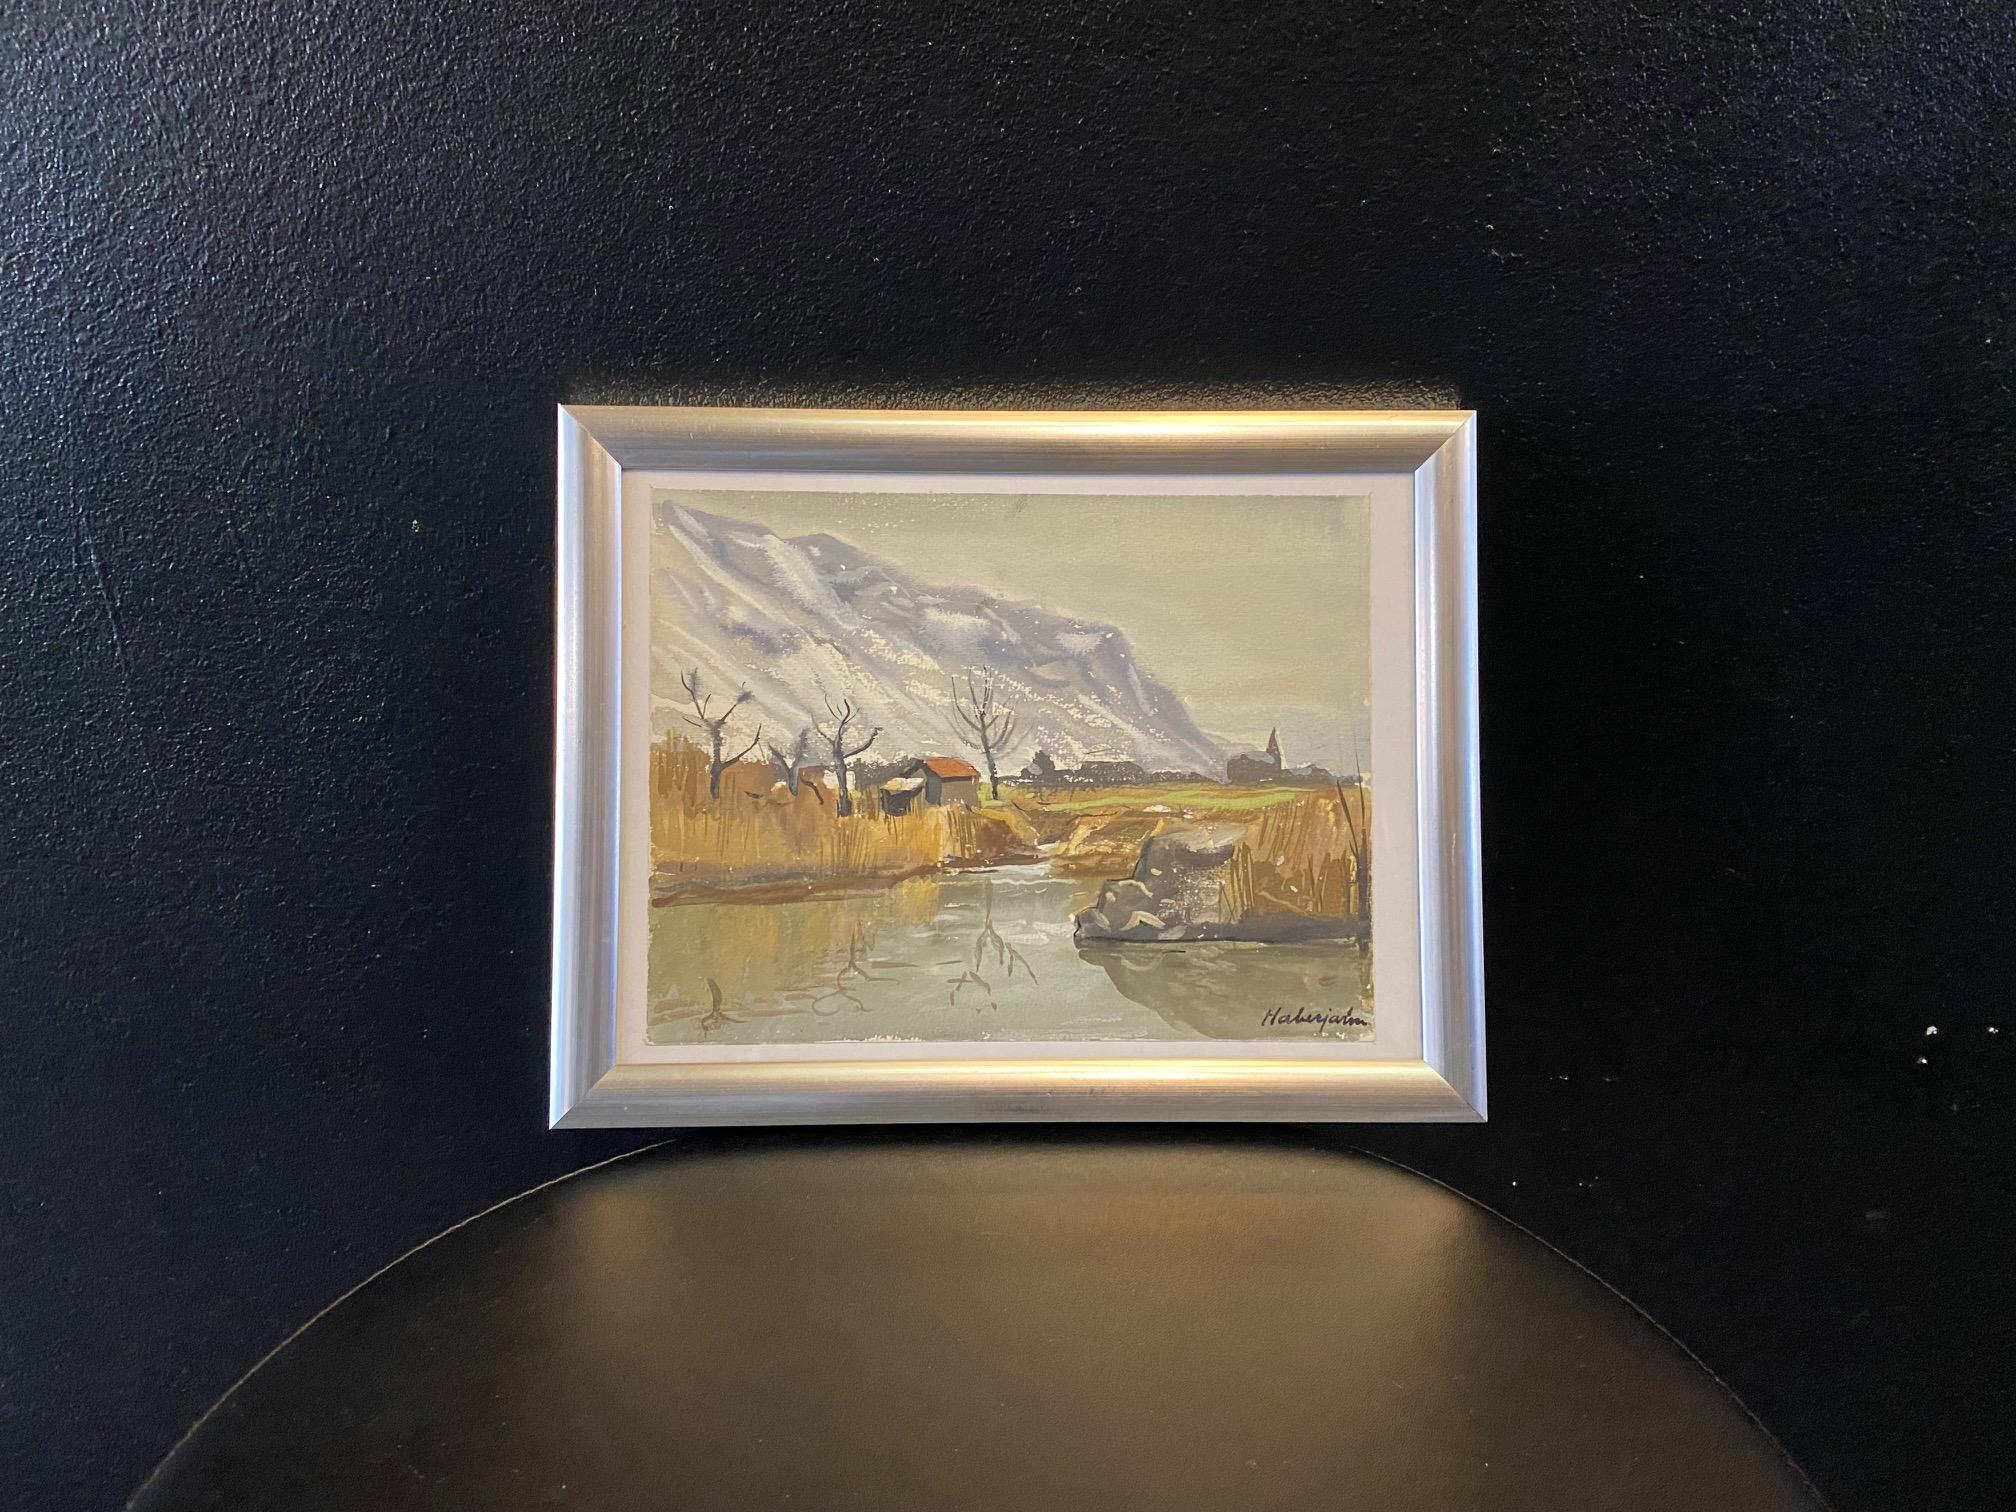 Gabriel Eduard HABERJAHN was an artist born in Switzerland in 1890 and died in 1956. His works have been sold at public auction 85 times, mostly in the Painting category. The oldest auction recorded on our site is Allée de peupliers sold in 1989 at